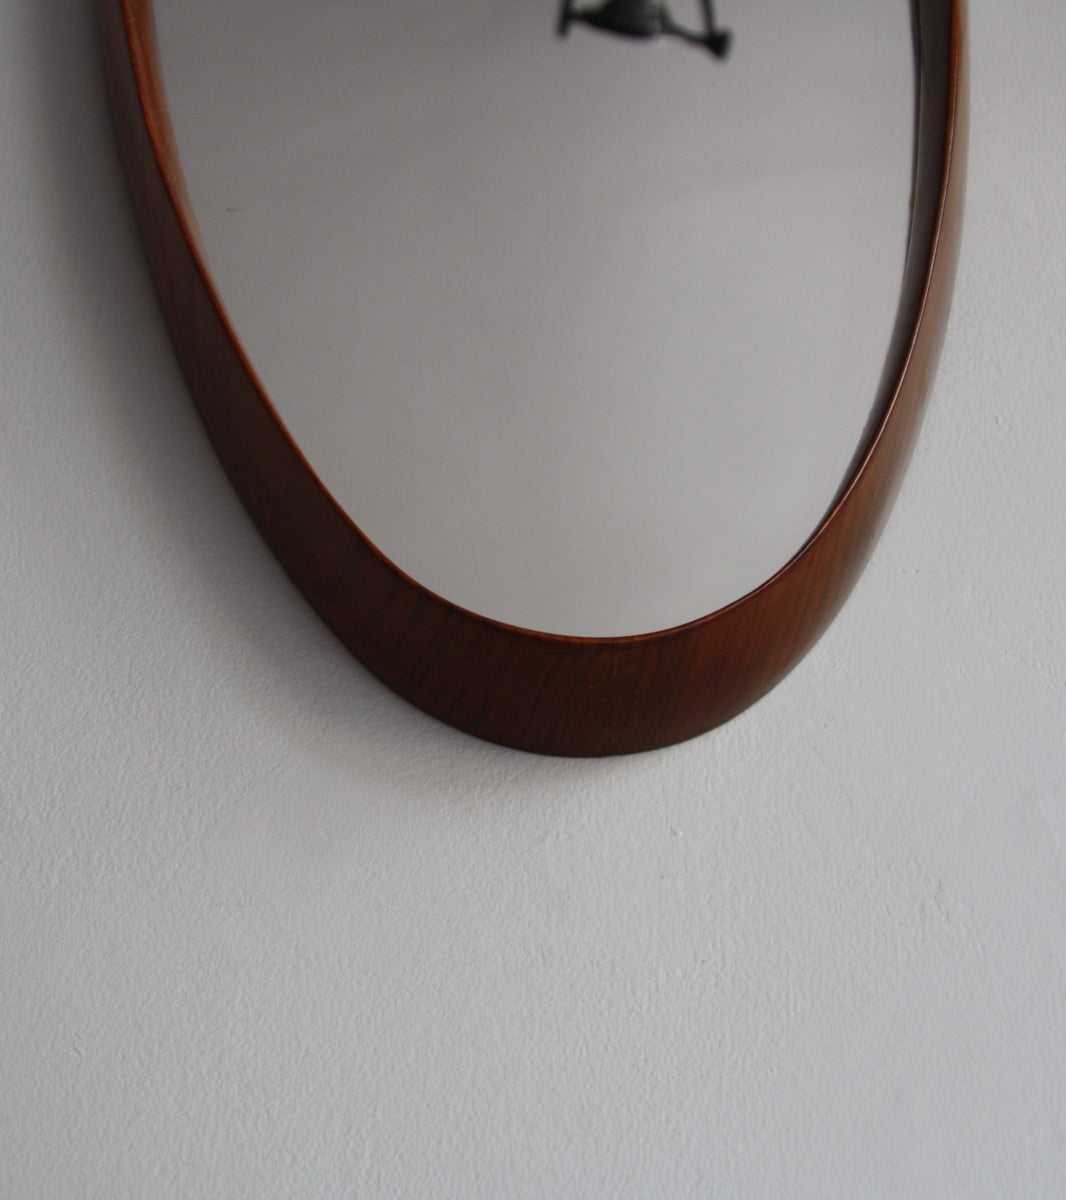 Original Hand-made Teak Oval Mirror with Leather Denmark C. 1950 - Image 9